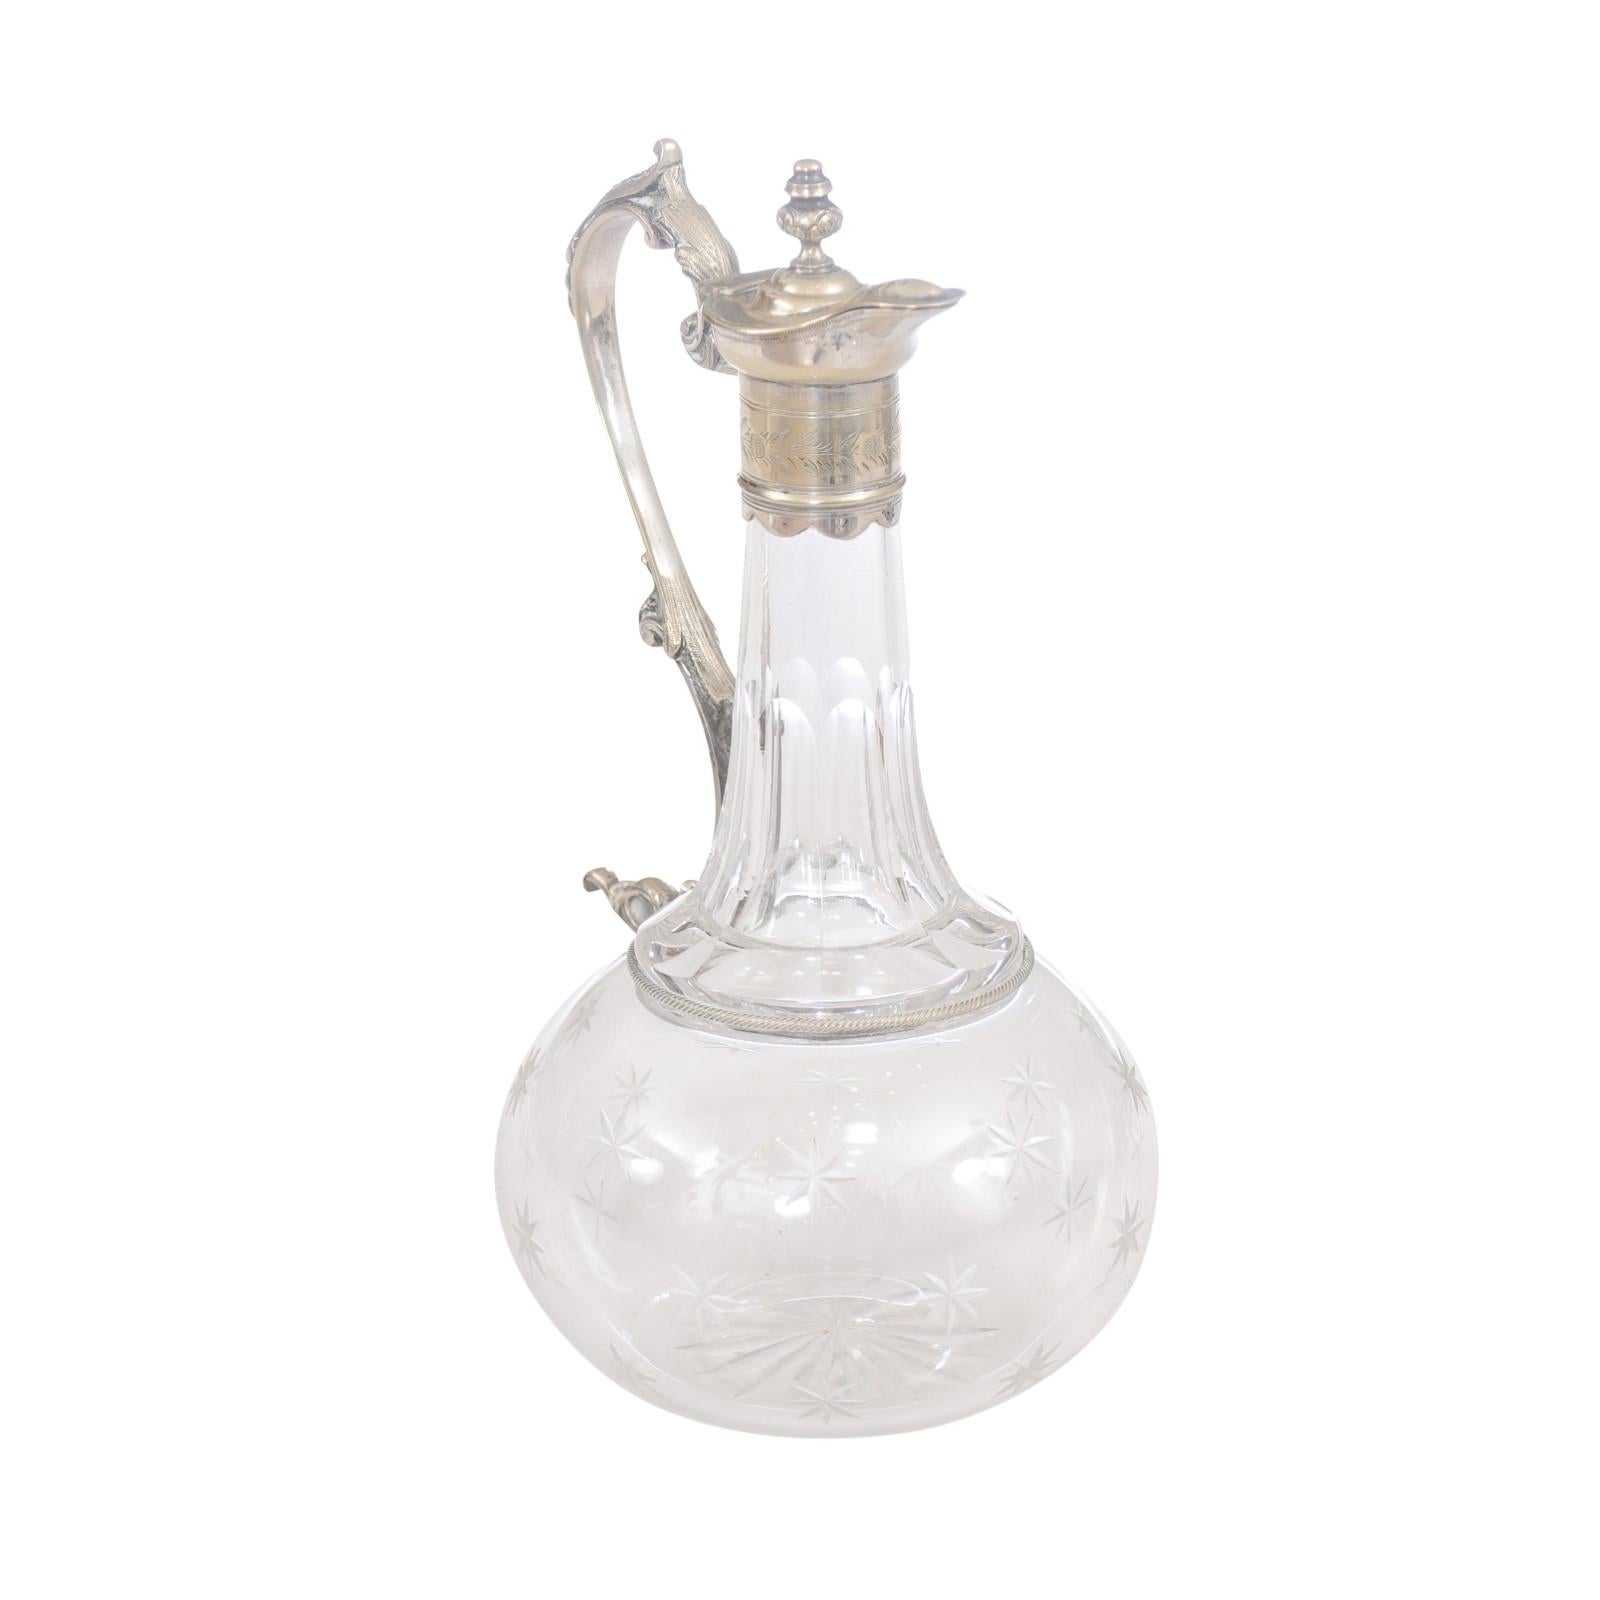 A French crystal wine decanter from the 19th century, with silver handle and top, and cut stars motifs on the body. A French crystal wine decanter from the 19th century, combining the brilliance of crystal with the opulence of silver, adorned with